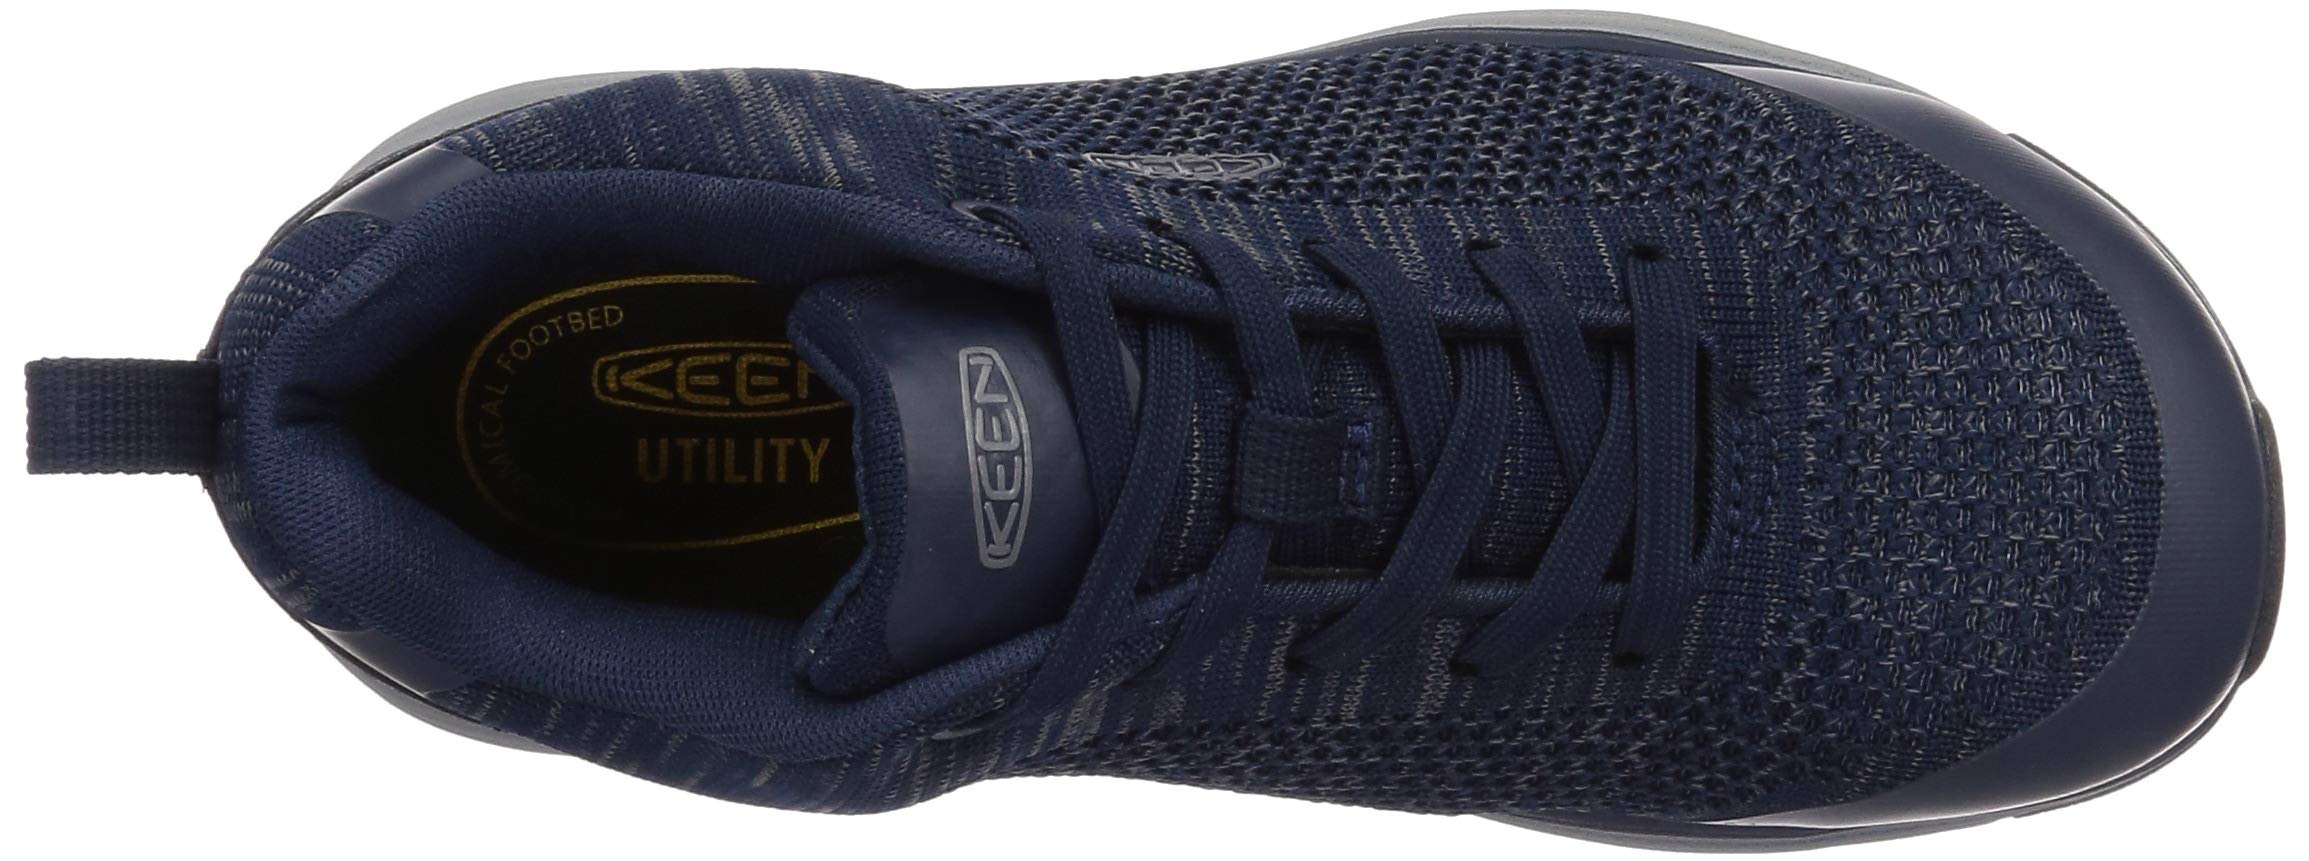 KEEN Utility Women's Sparta Low Height Alloy Toe Work Shoes